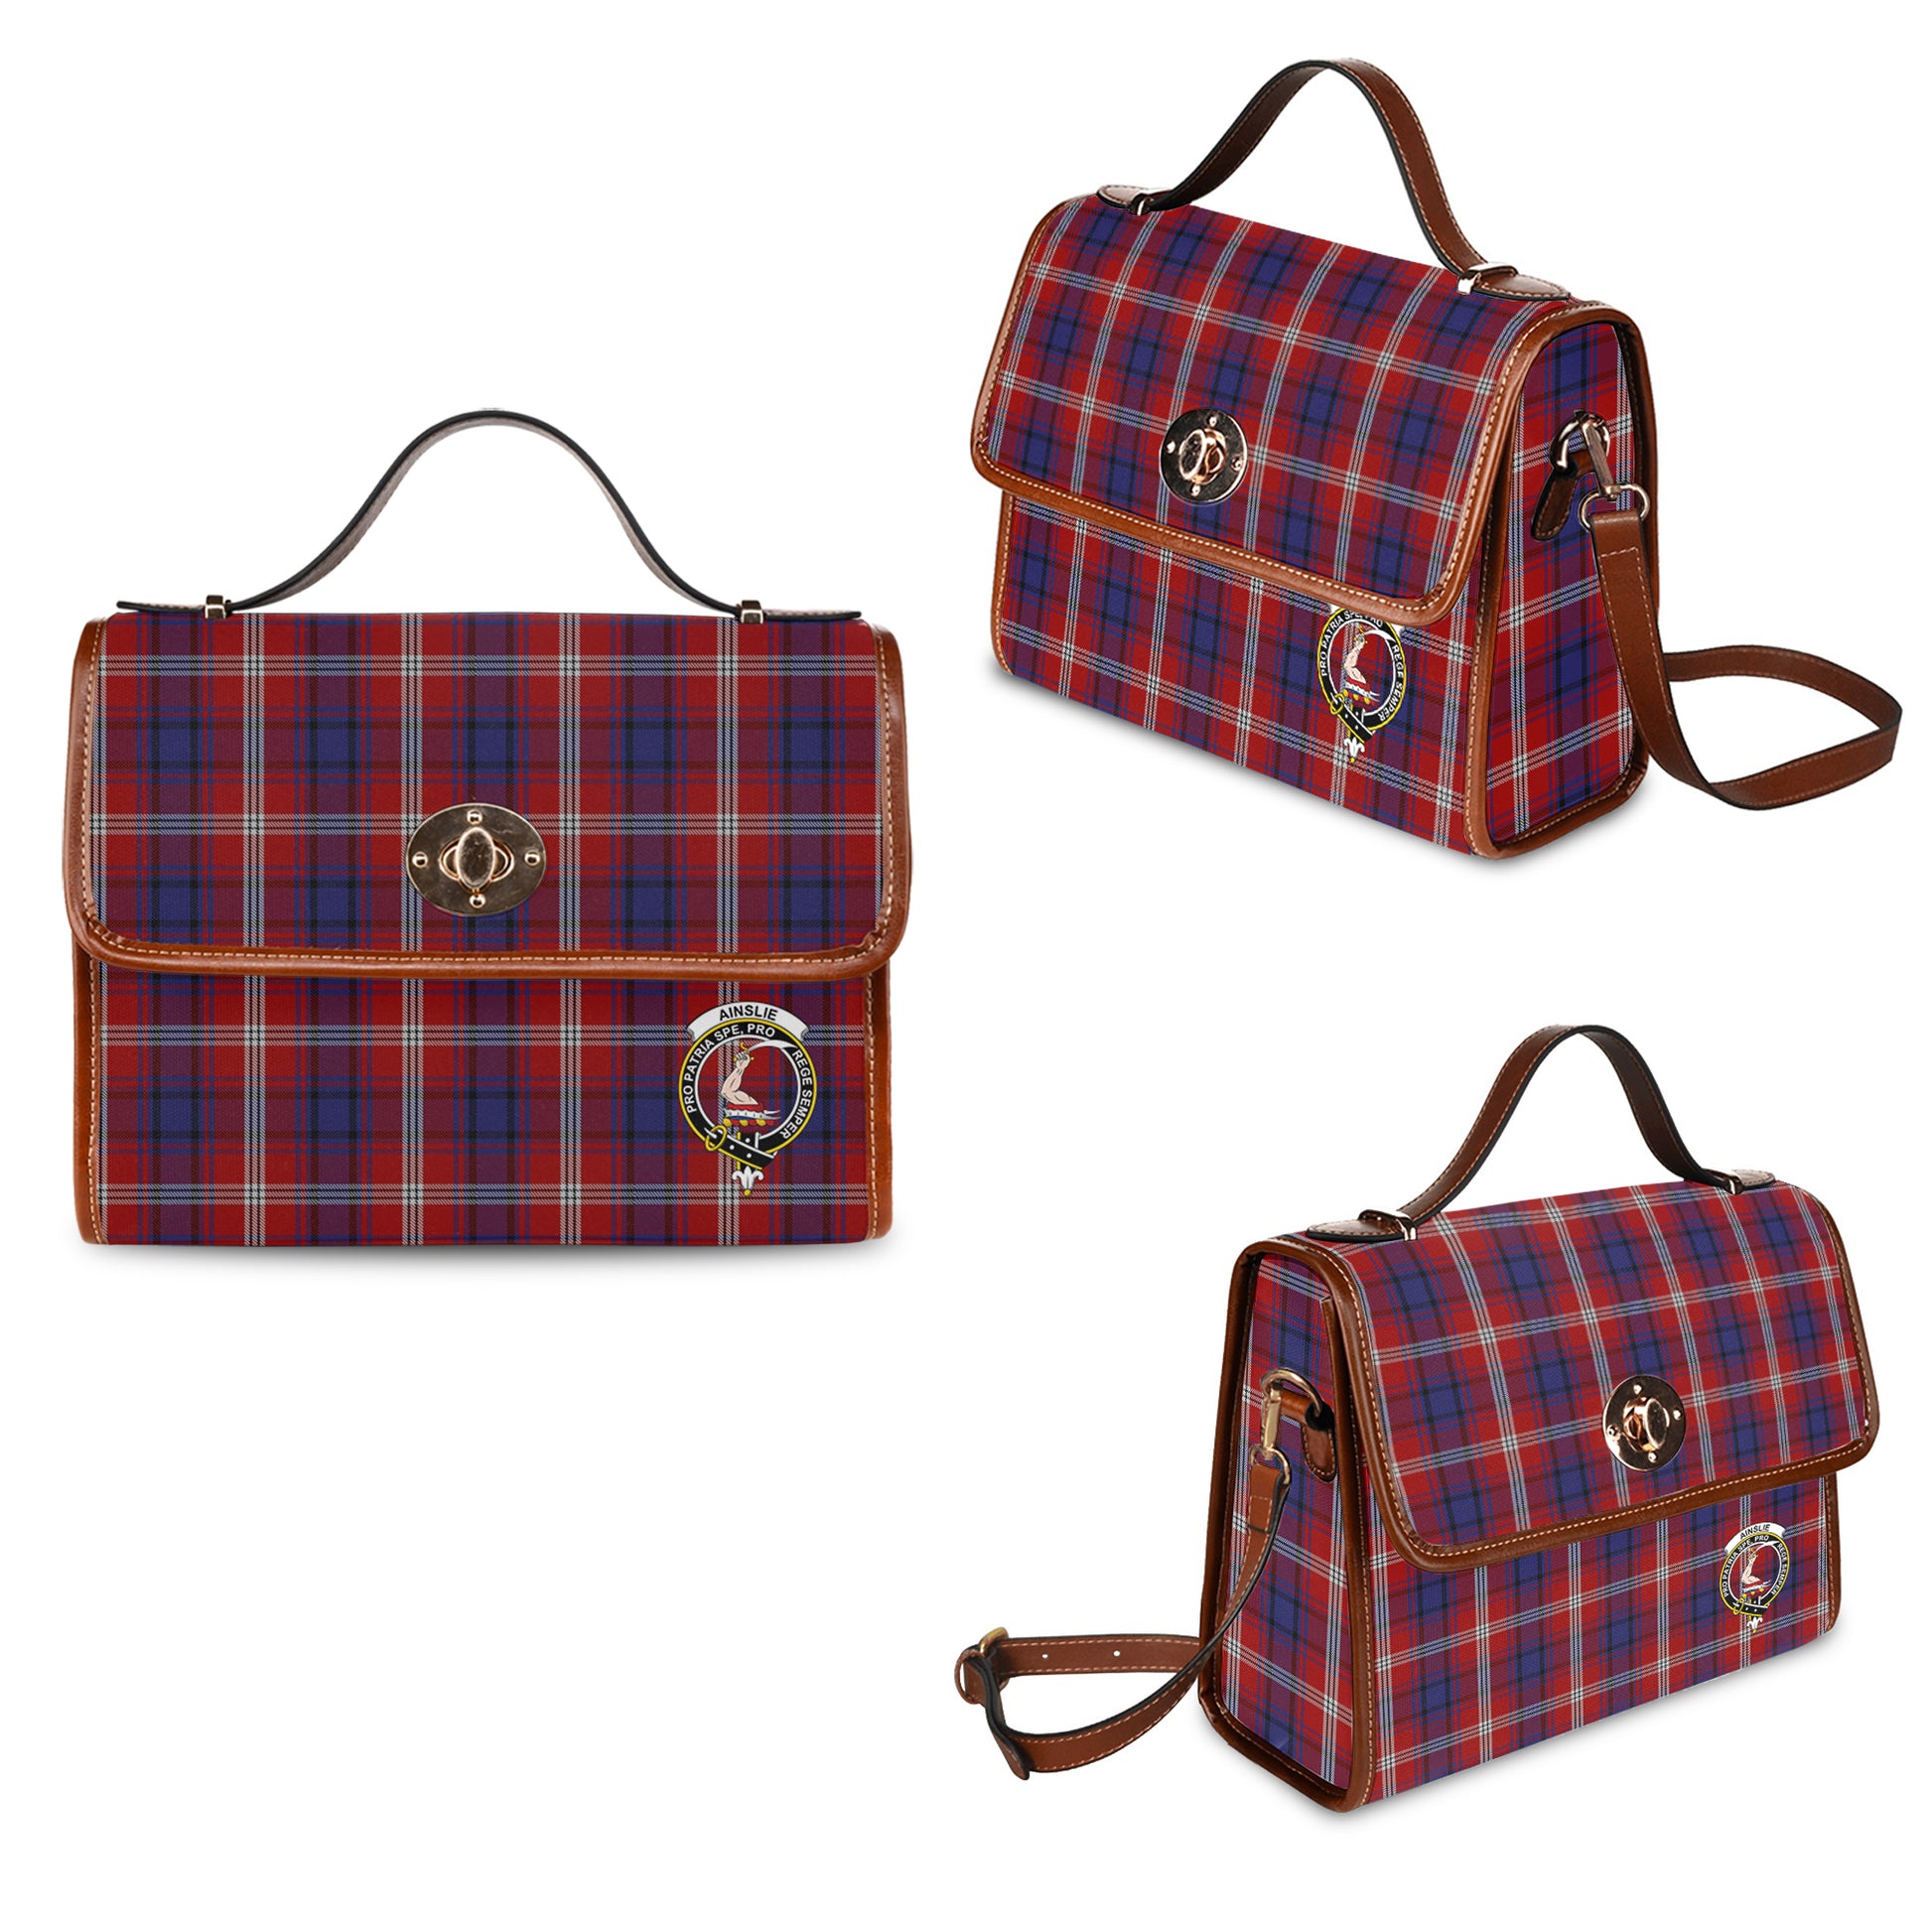 Ainslie Tartan Leather Strap Waterproof Canvas Bag with Family Crest One Size 34cm * 42cm (13.4" x 16.5") - Tartanvibesclothing